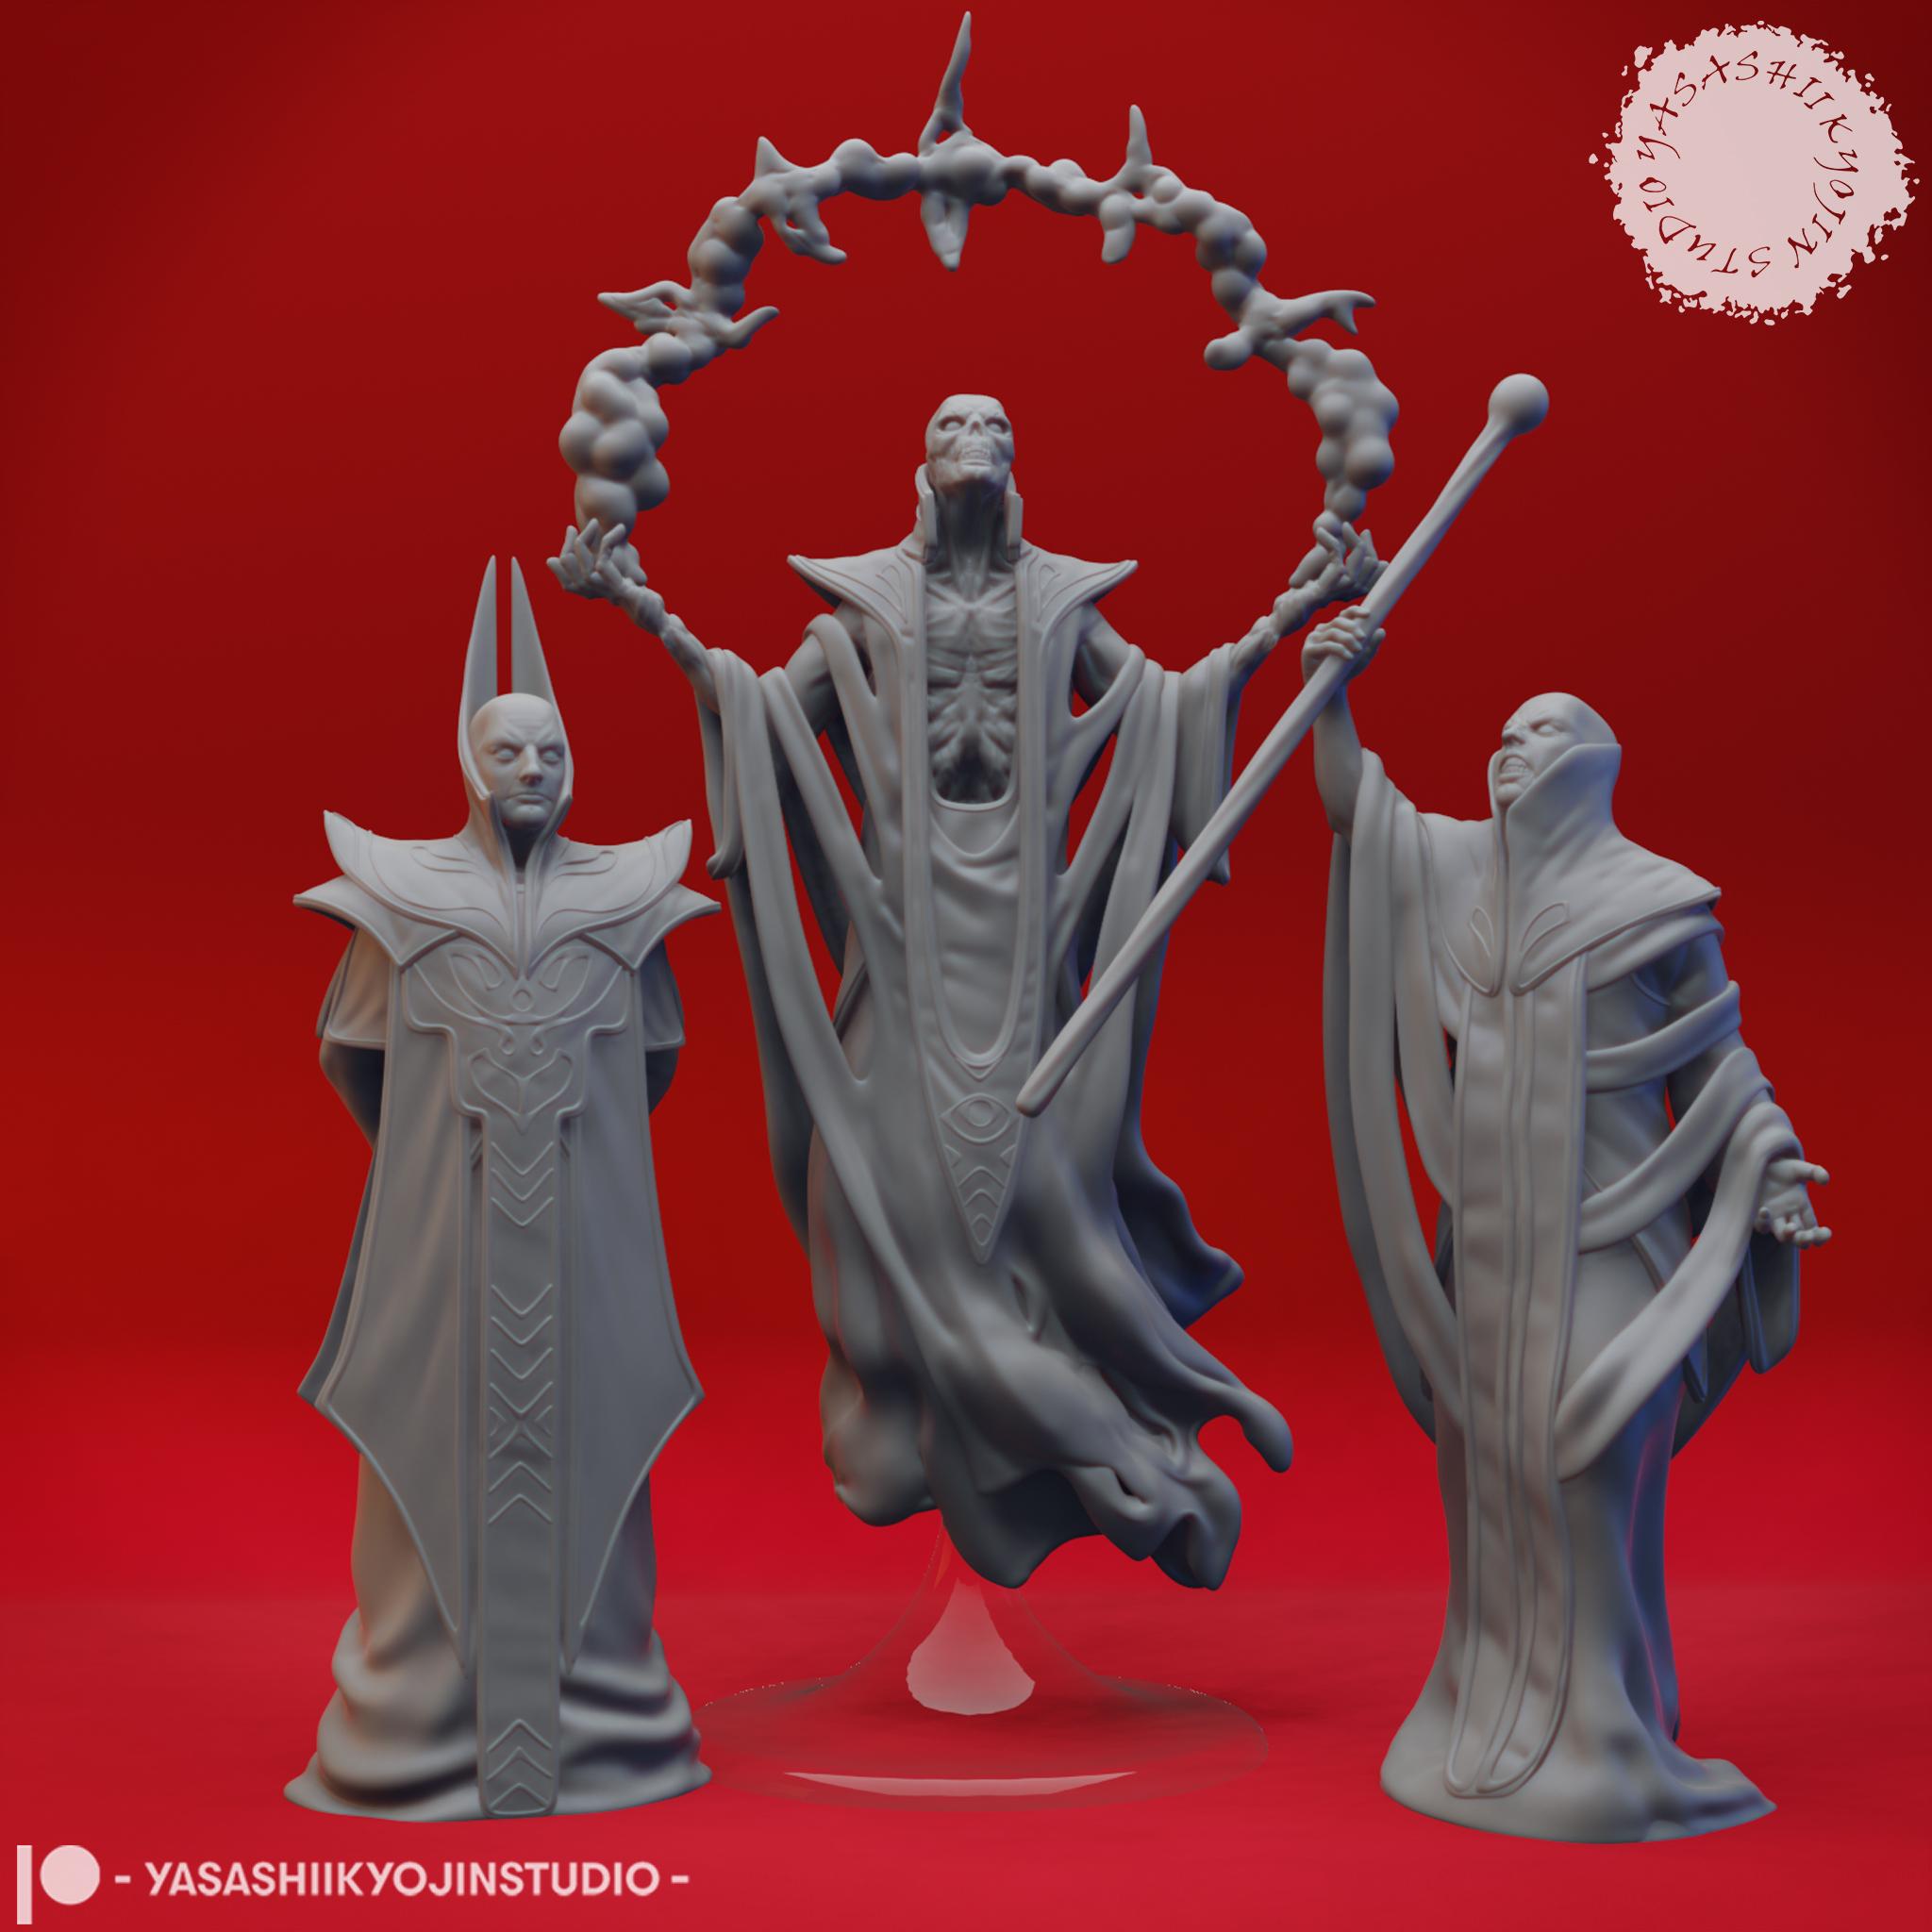 Red Wizard Cultists - Tabletop Miniatures (Pre-Supported) 3d model